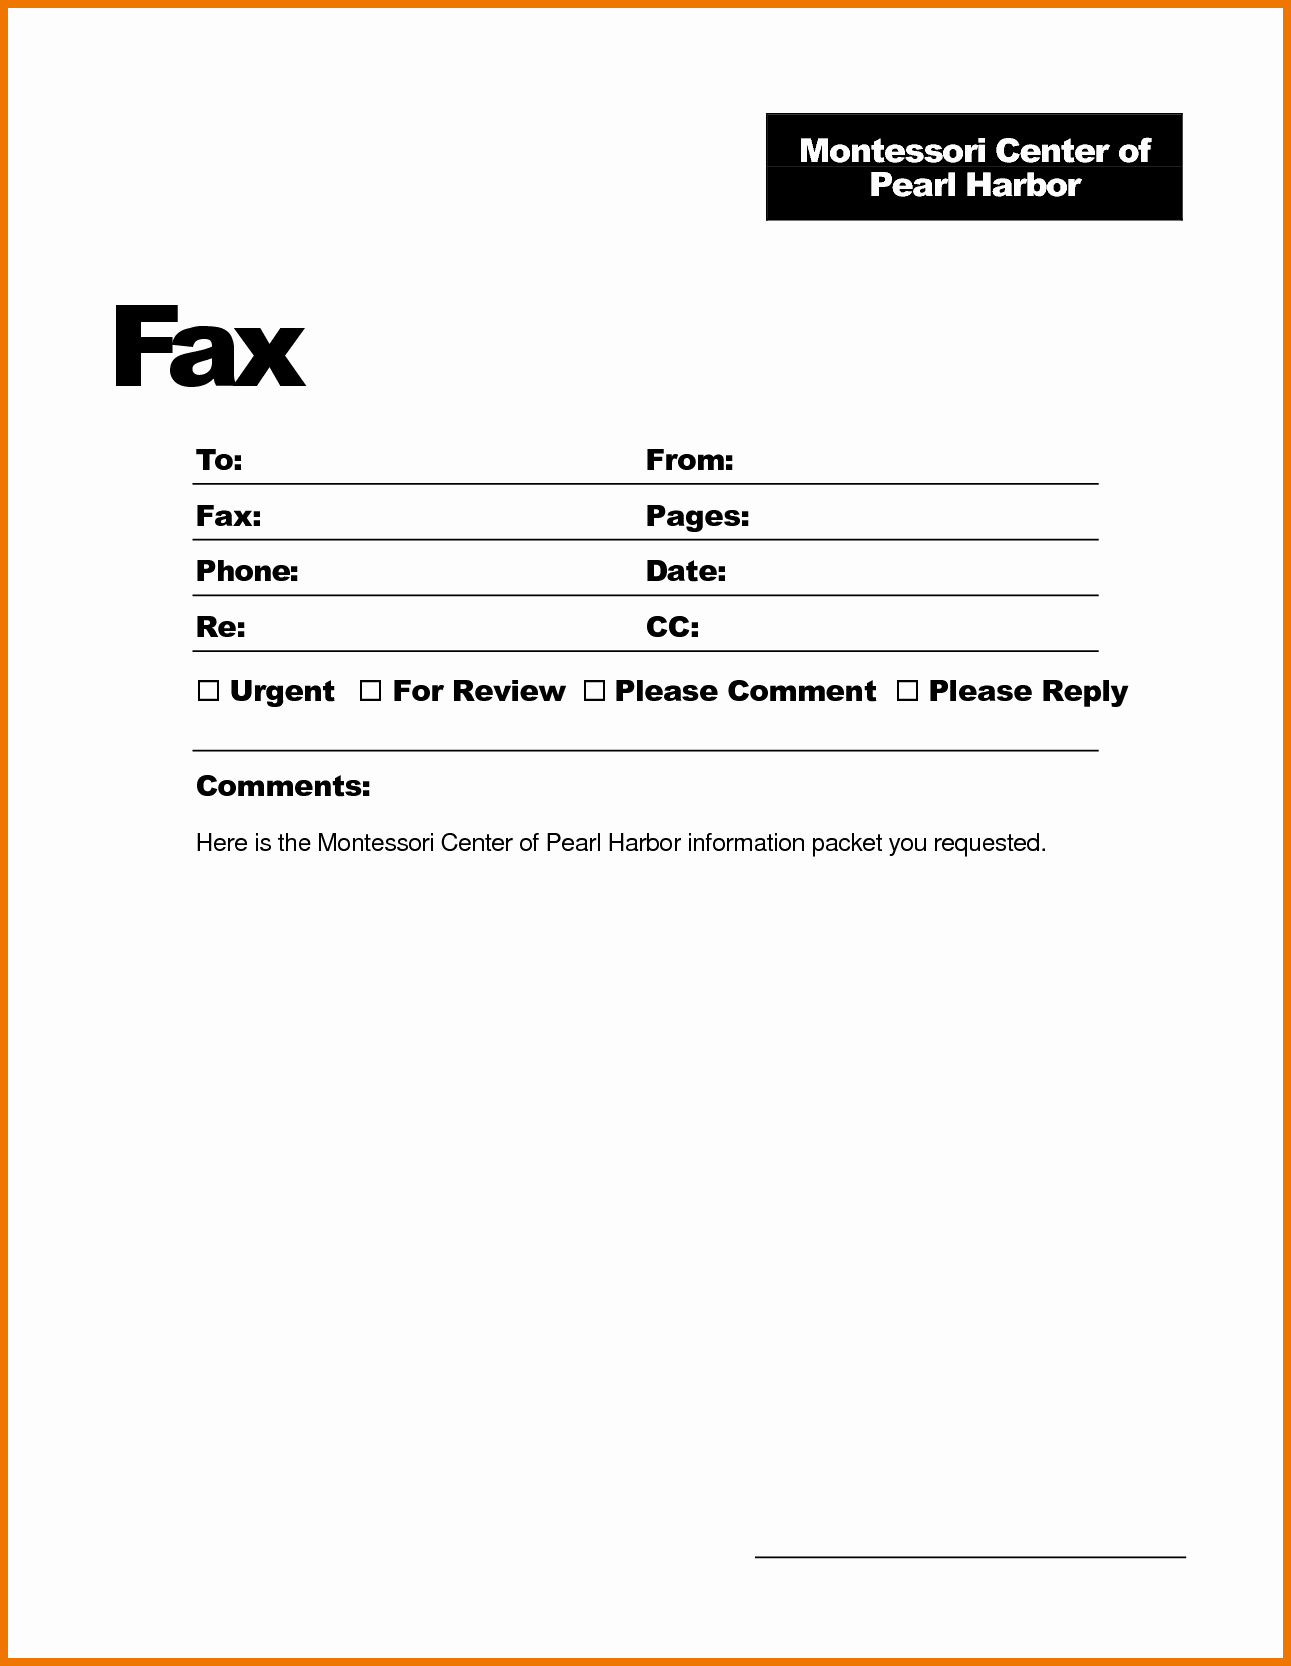 How to Fax Cover Sheet Best Of Example Fax Cover Sheet Bamboodownunder